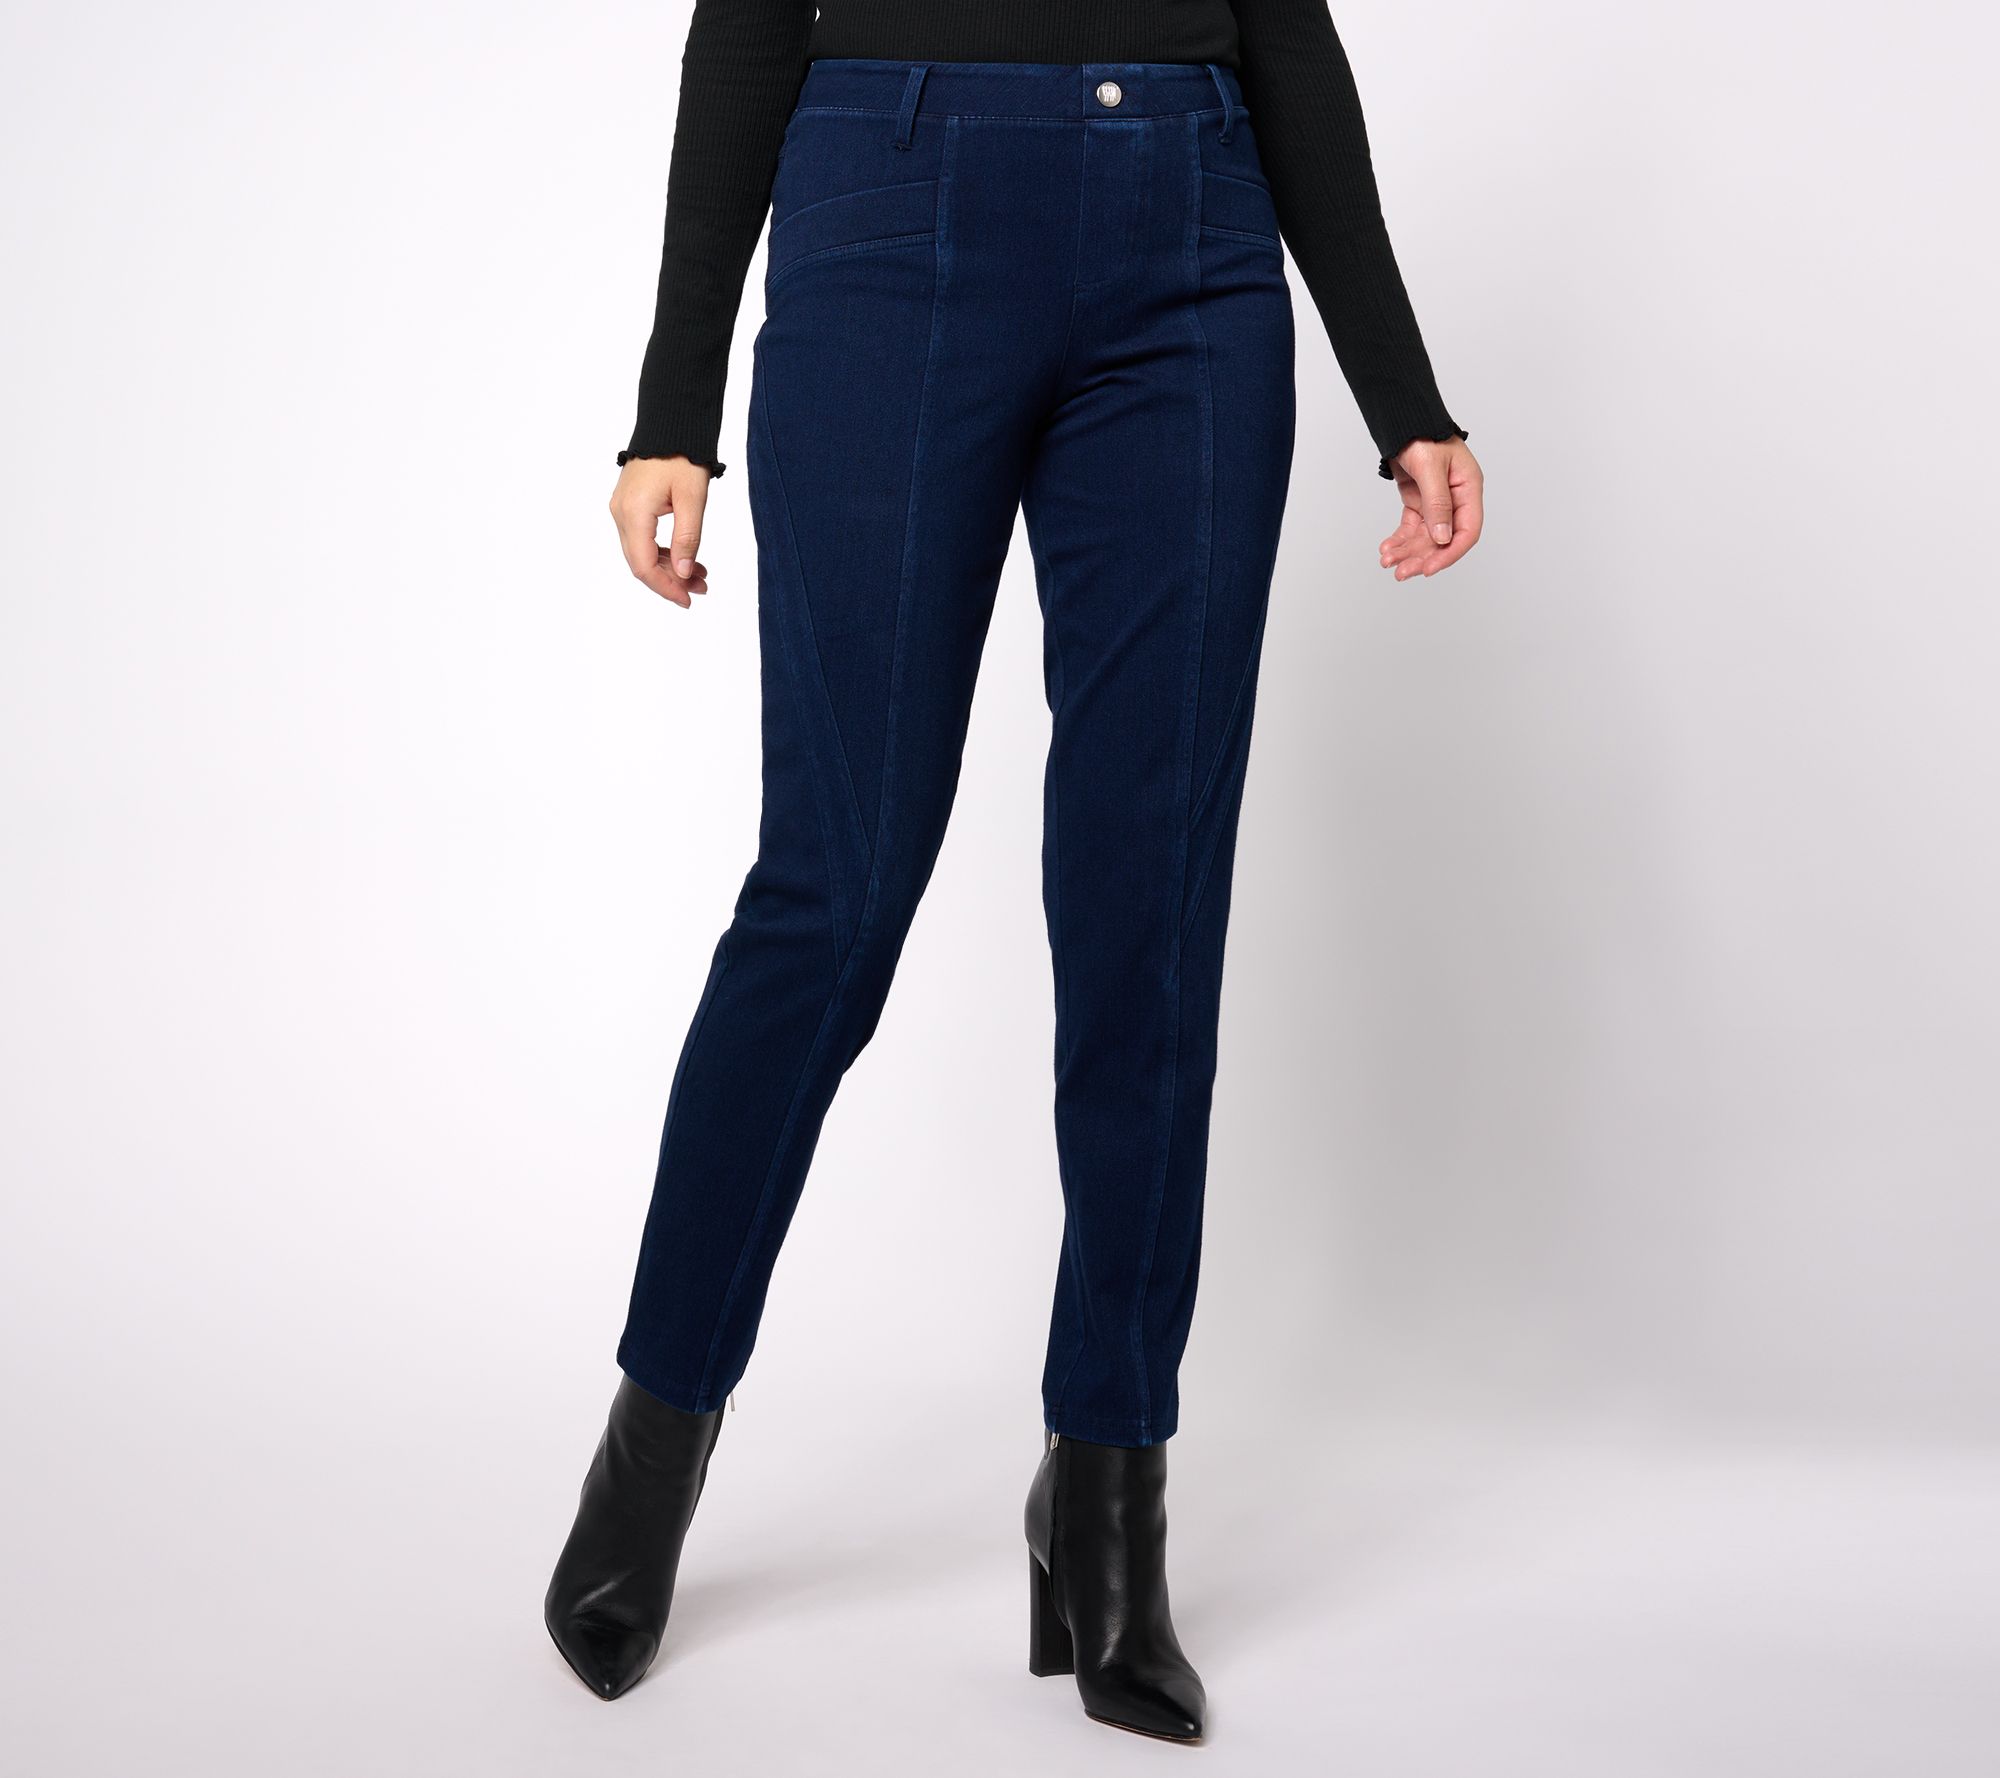 Women with Control - Jeans - Fashion 